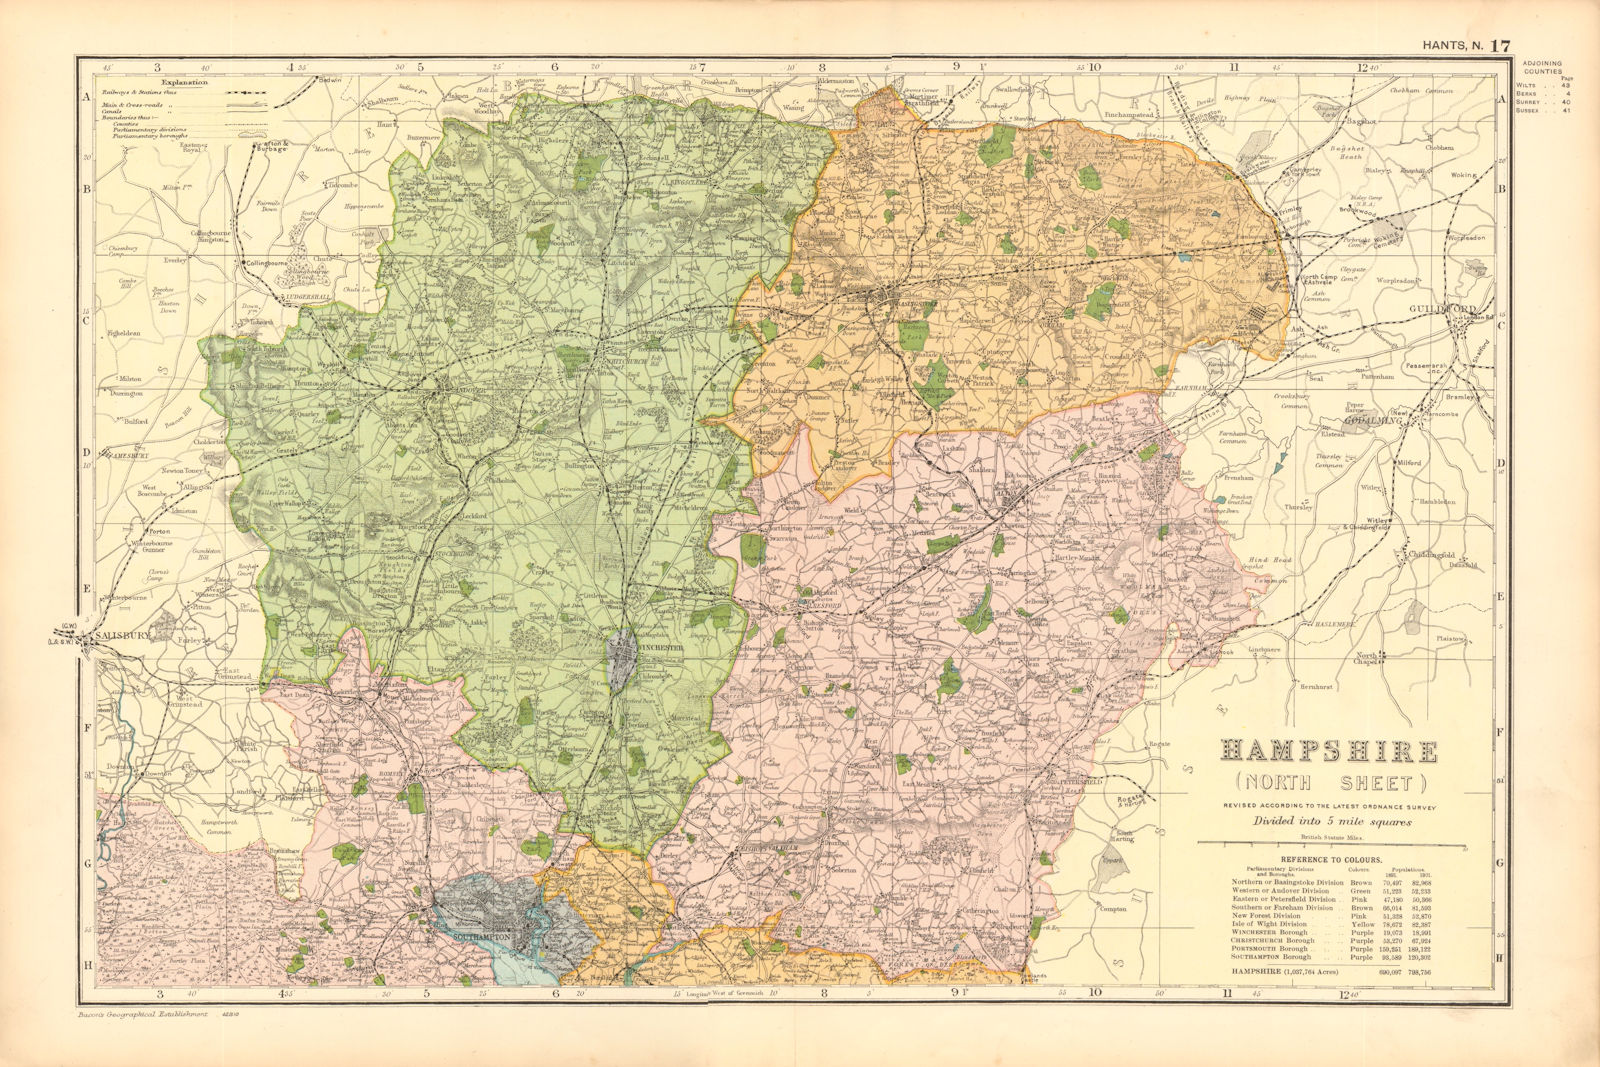 HAMPSHIRE (NORTH). Showing Parliamentary divisions & parks. BACON 1904 old map